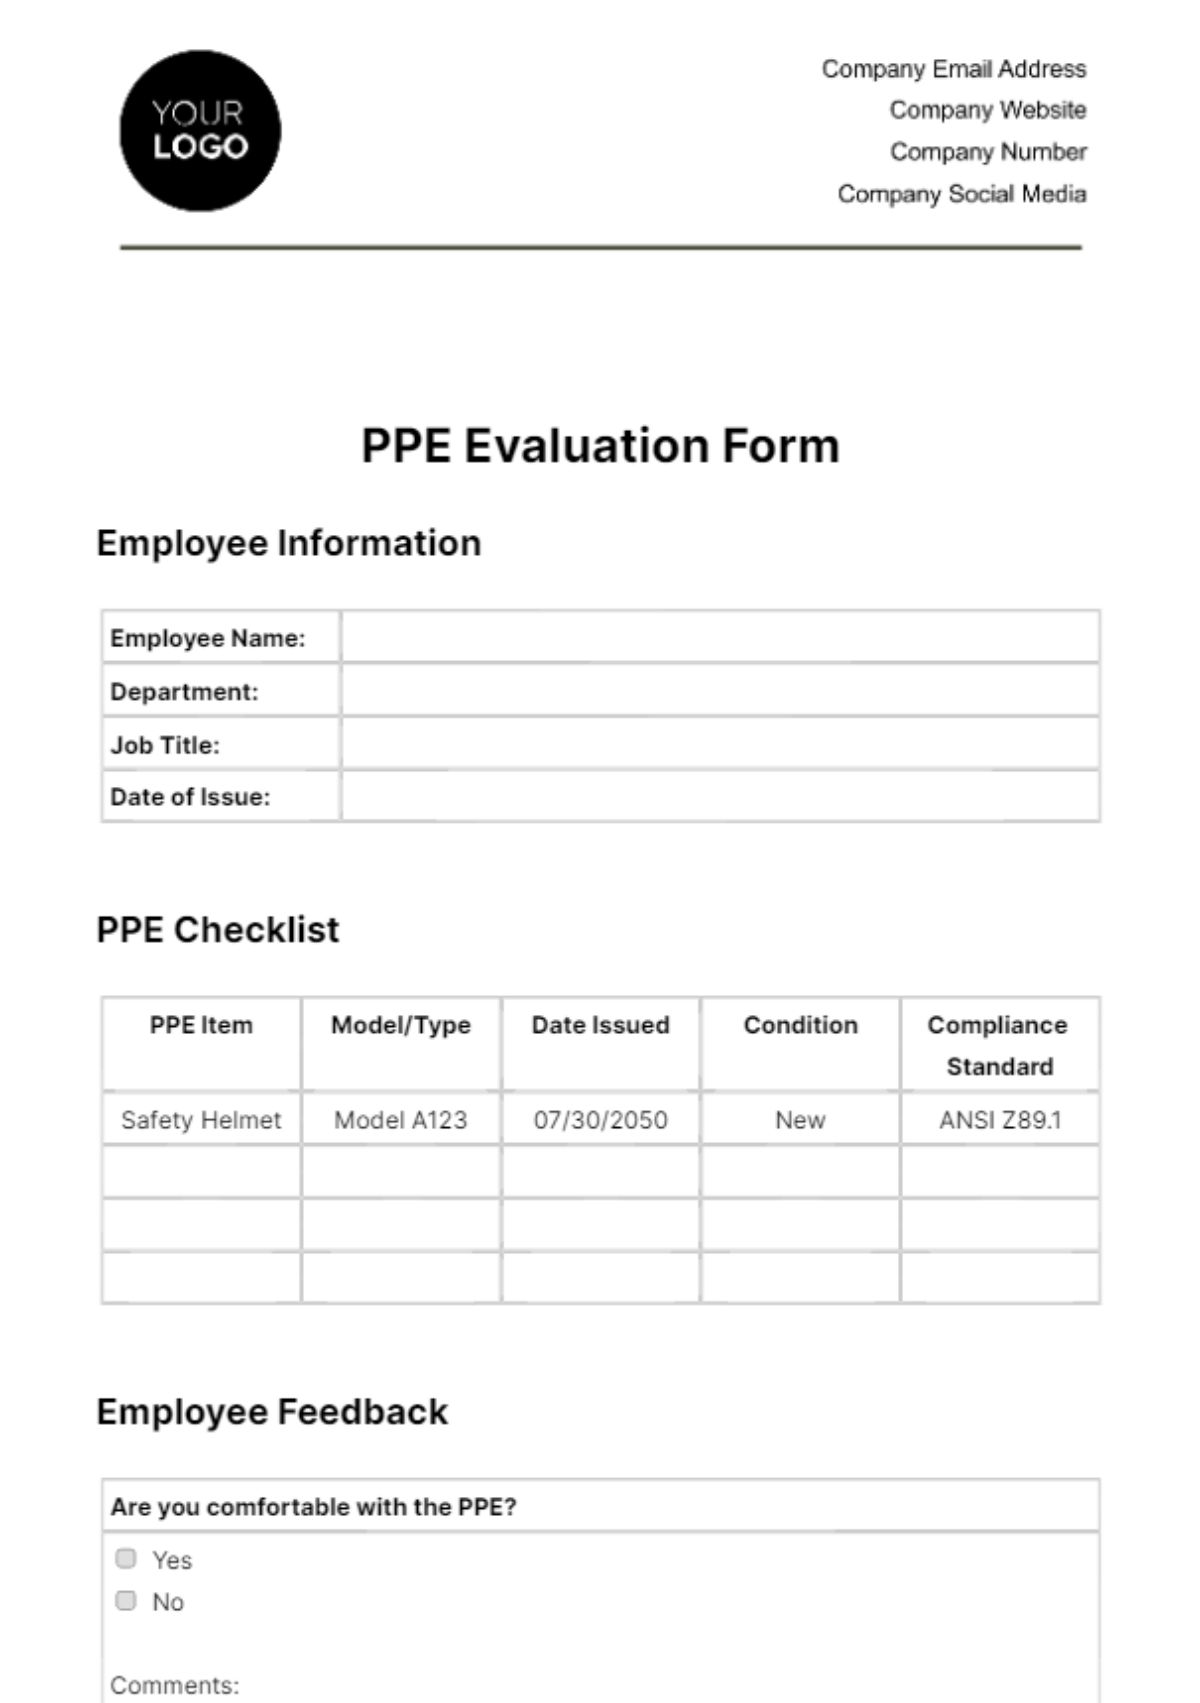 PPE Evaluation Form Template